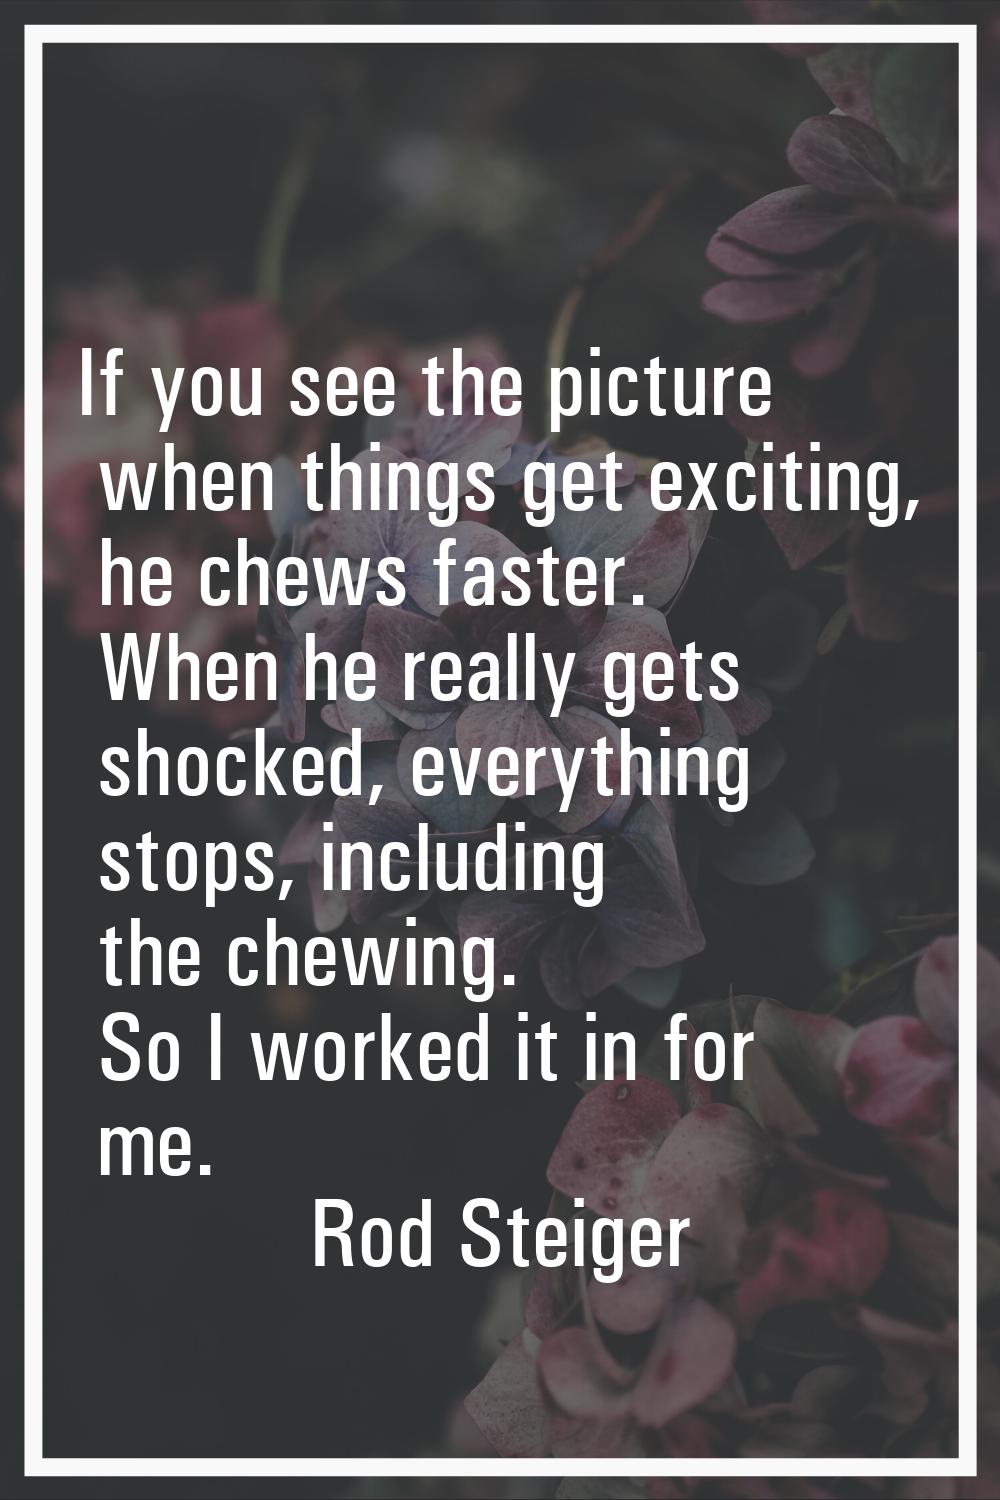 If you see the picture when things get exciting, he chews faster. When he really gets shocked, ever